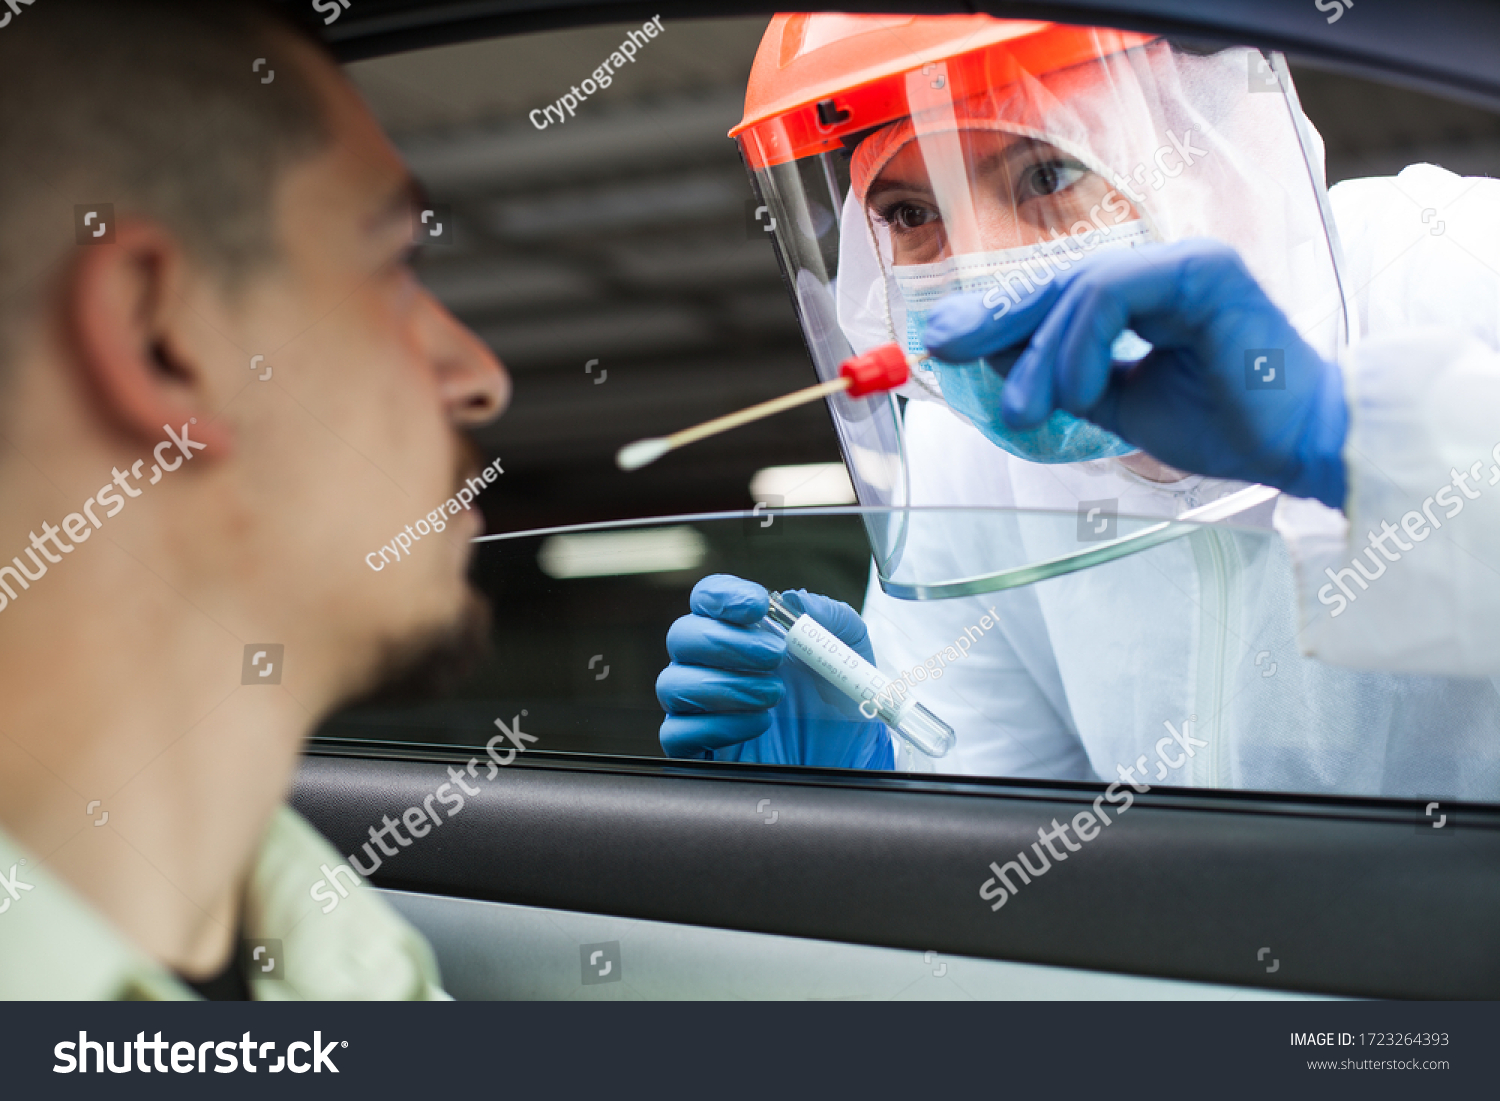 Medical NHS UK worker performing drive-thru COVID-19 check,taking nasal swab specimen sample from male patient through car window,PCR diagnostic for Coronavirus presence,doctor in PPE holding test kit #1723264393